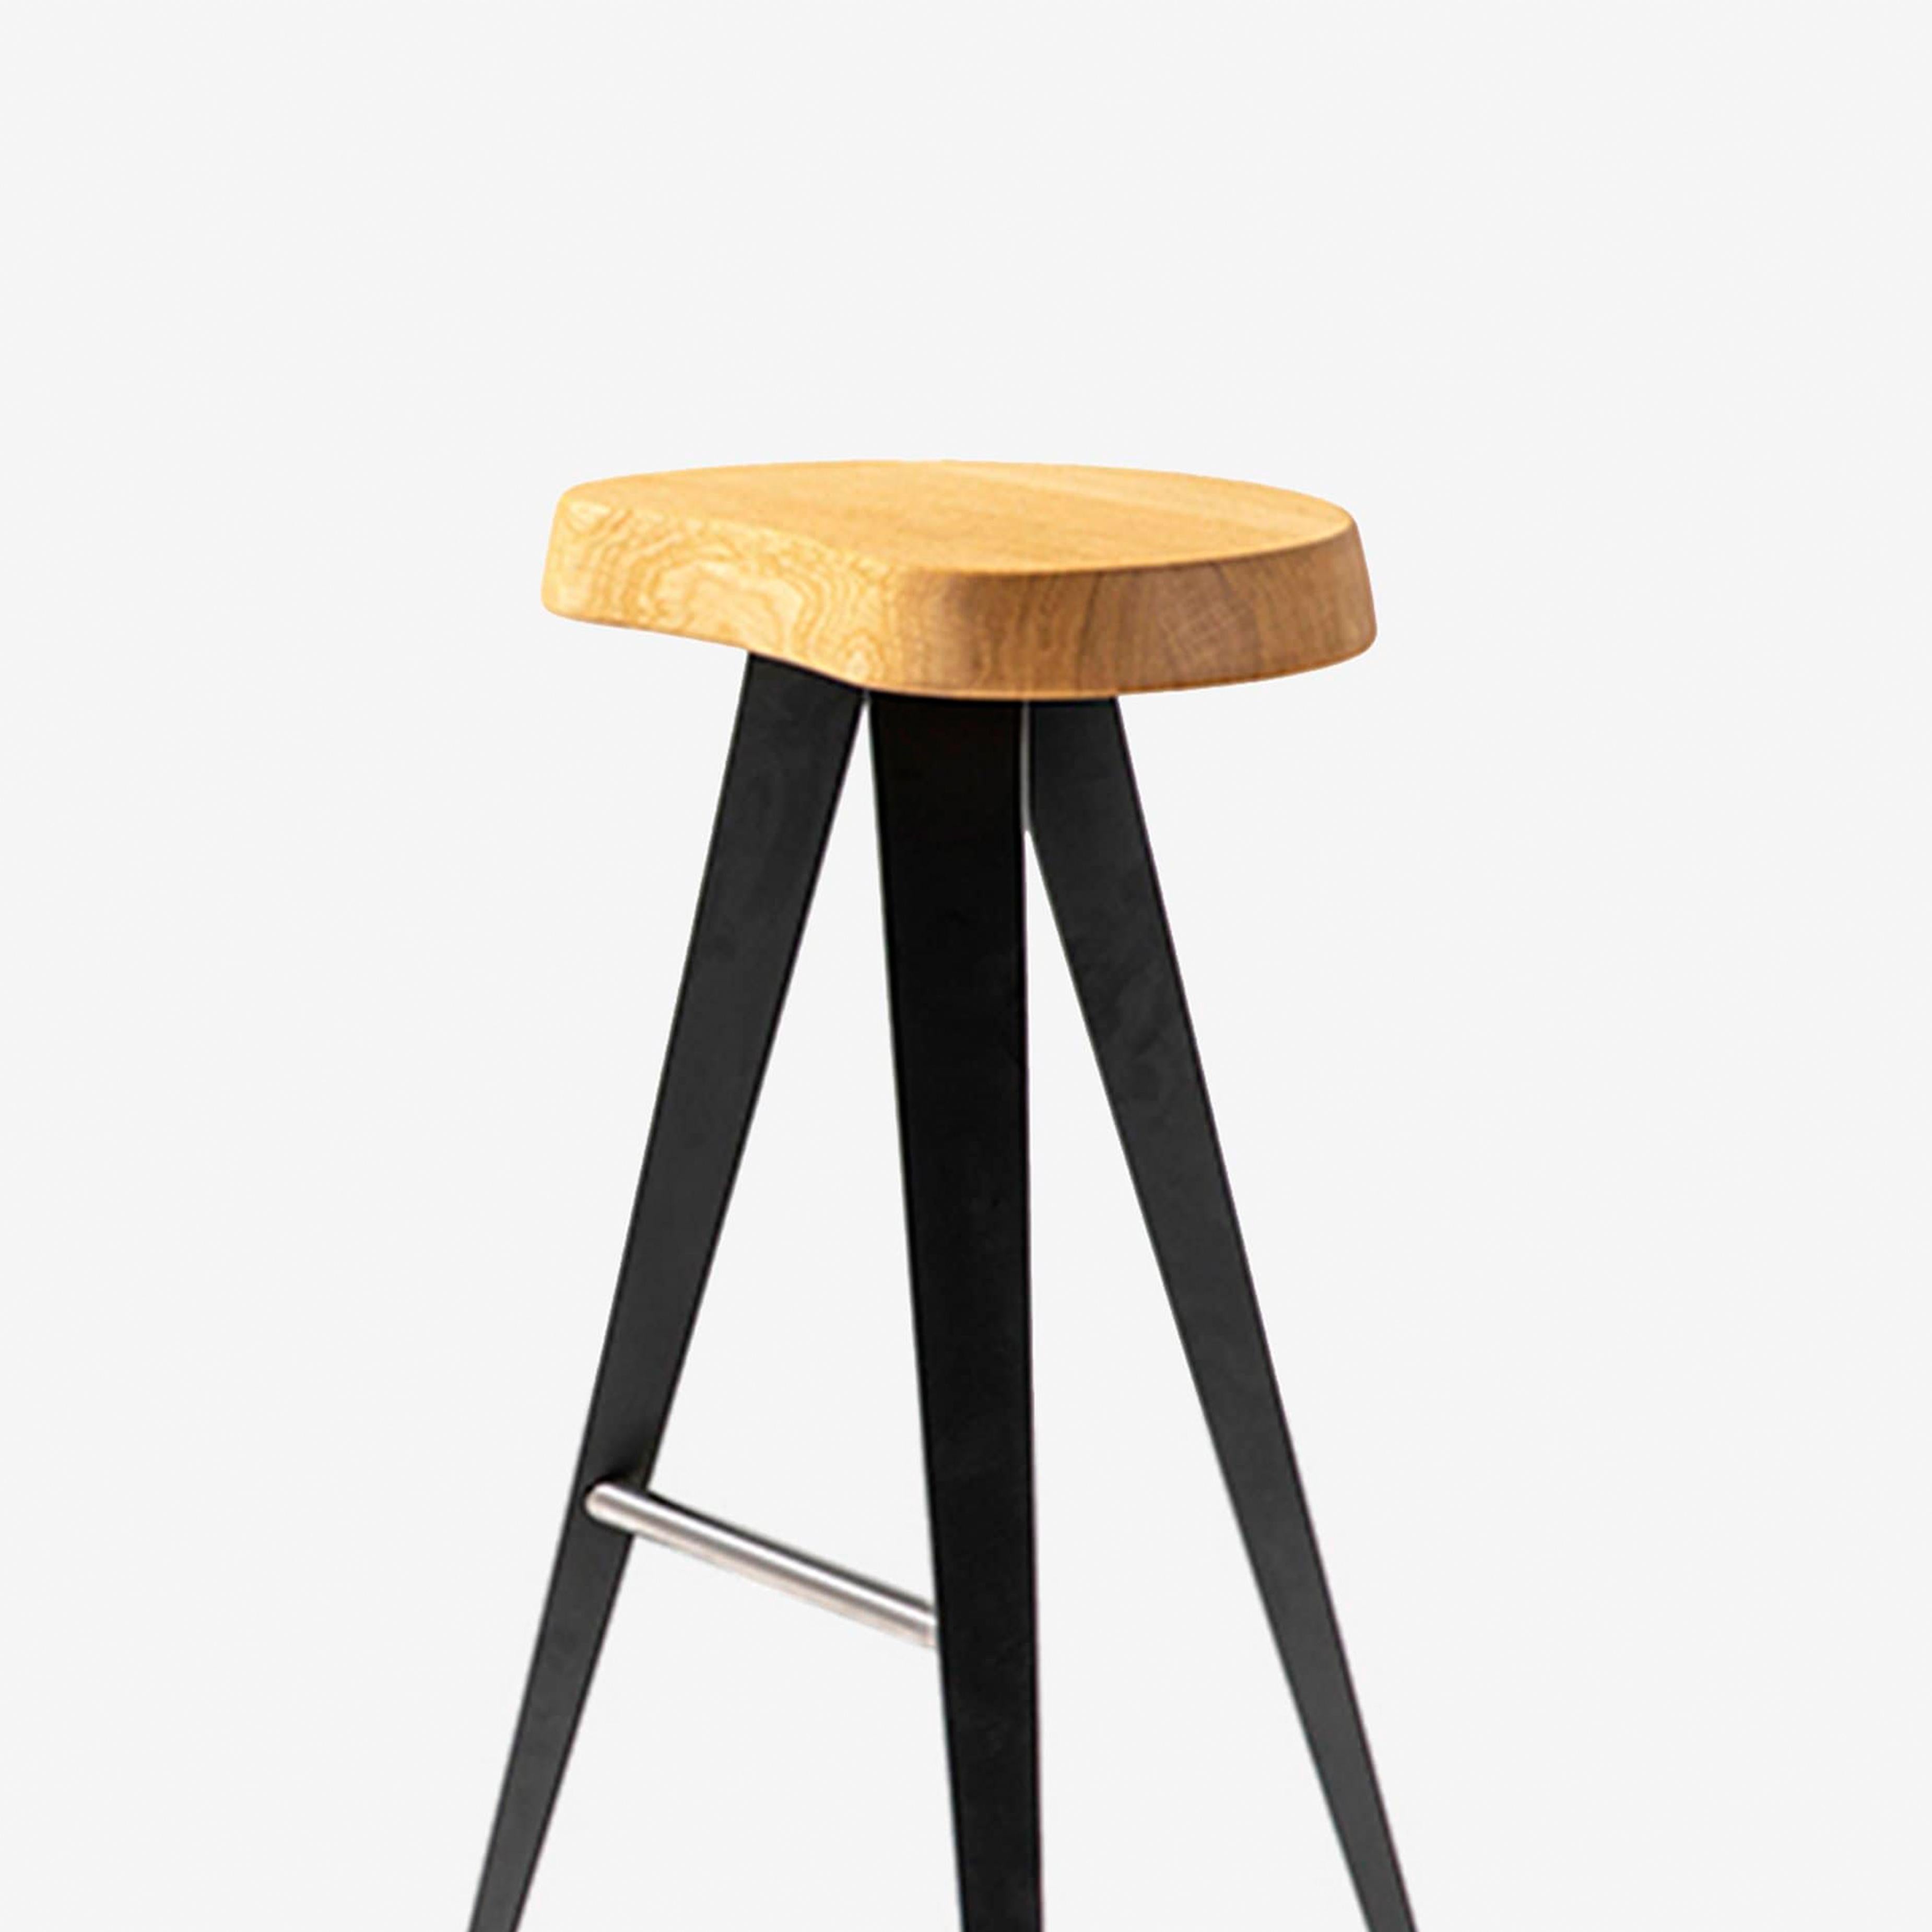 This stool in the Mexique family, measures 72 cm high. The free-form chair, in solid wood, is set off beautifully by the lightness of the geometric structure of the metal legs with matte black or glossy gunmetal painted finish.

This designer